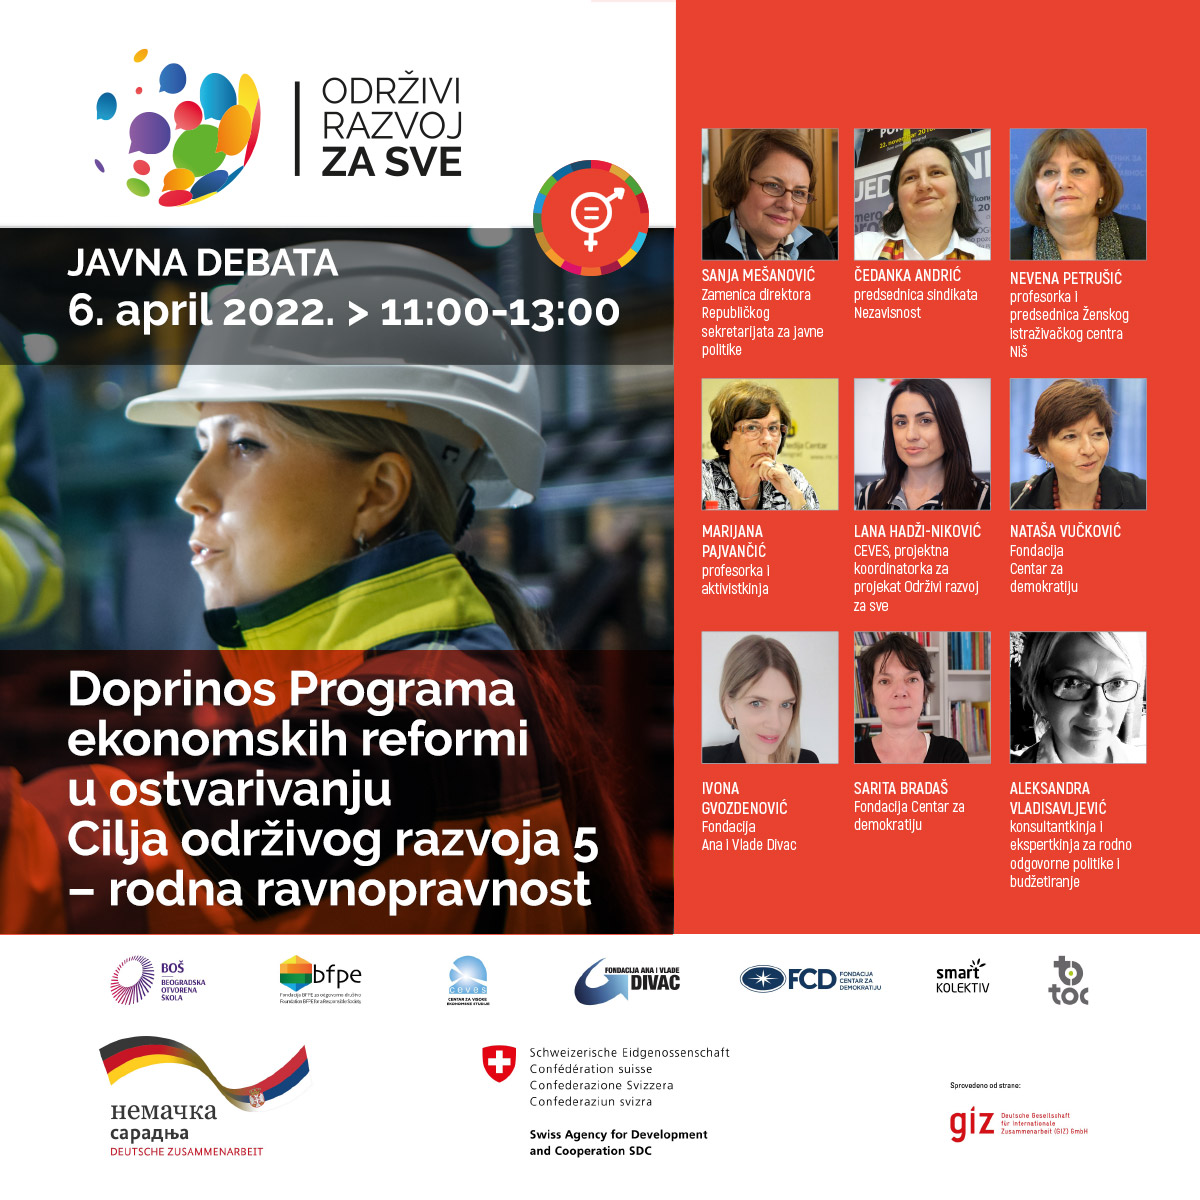 Public debate: Contribution of the Economic Reforms Programme (ERP) to Achieving SDG 5 - Gender Equality